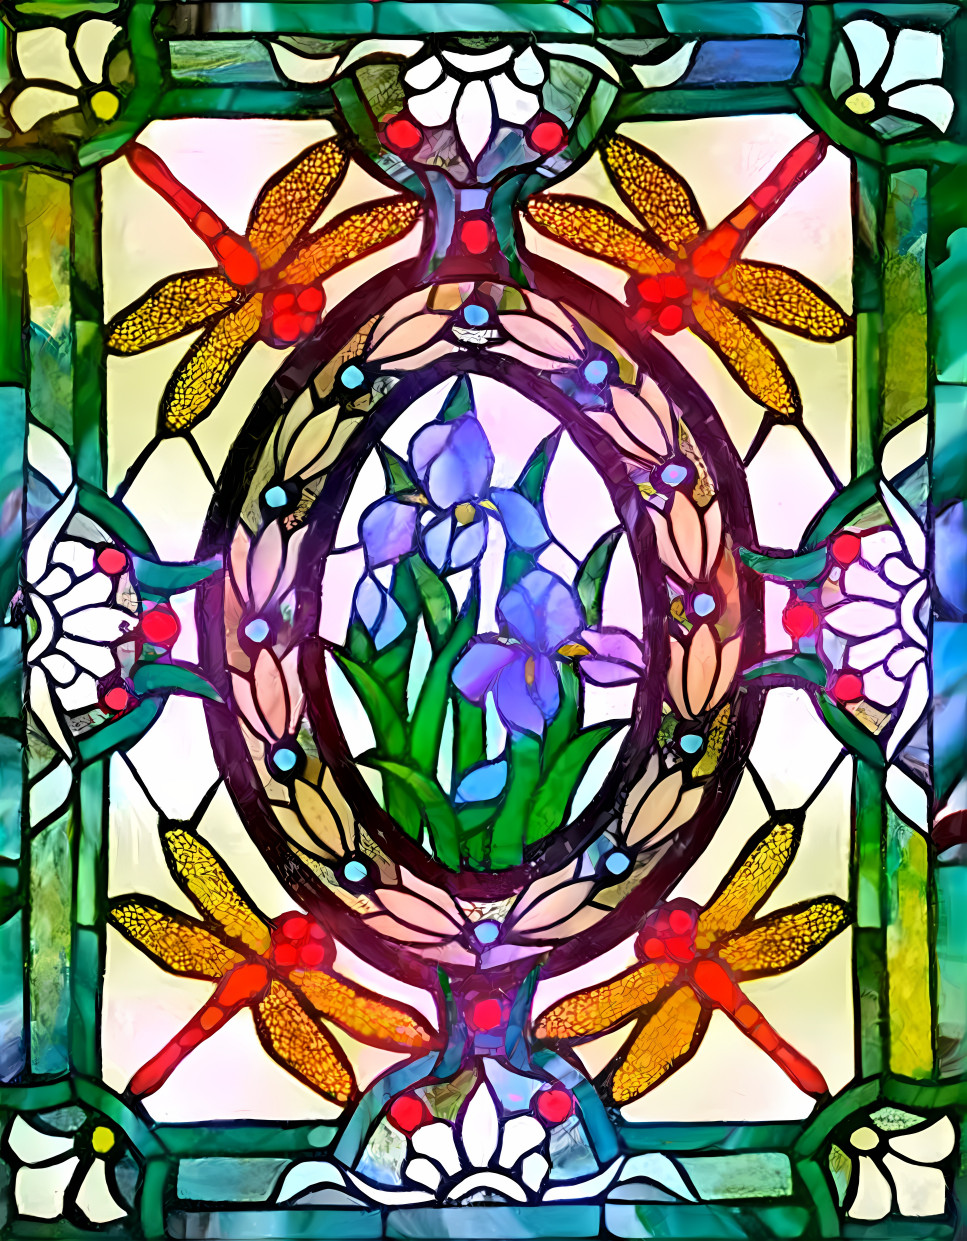 Stained glass irises with dragonflies